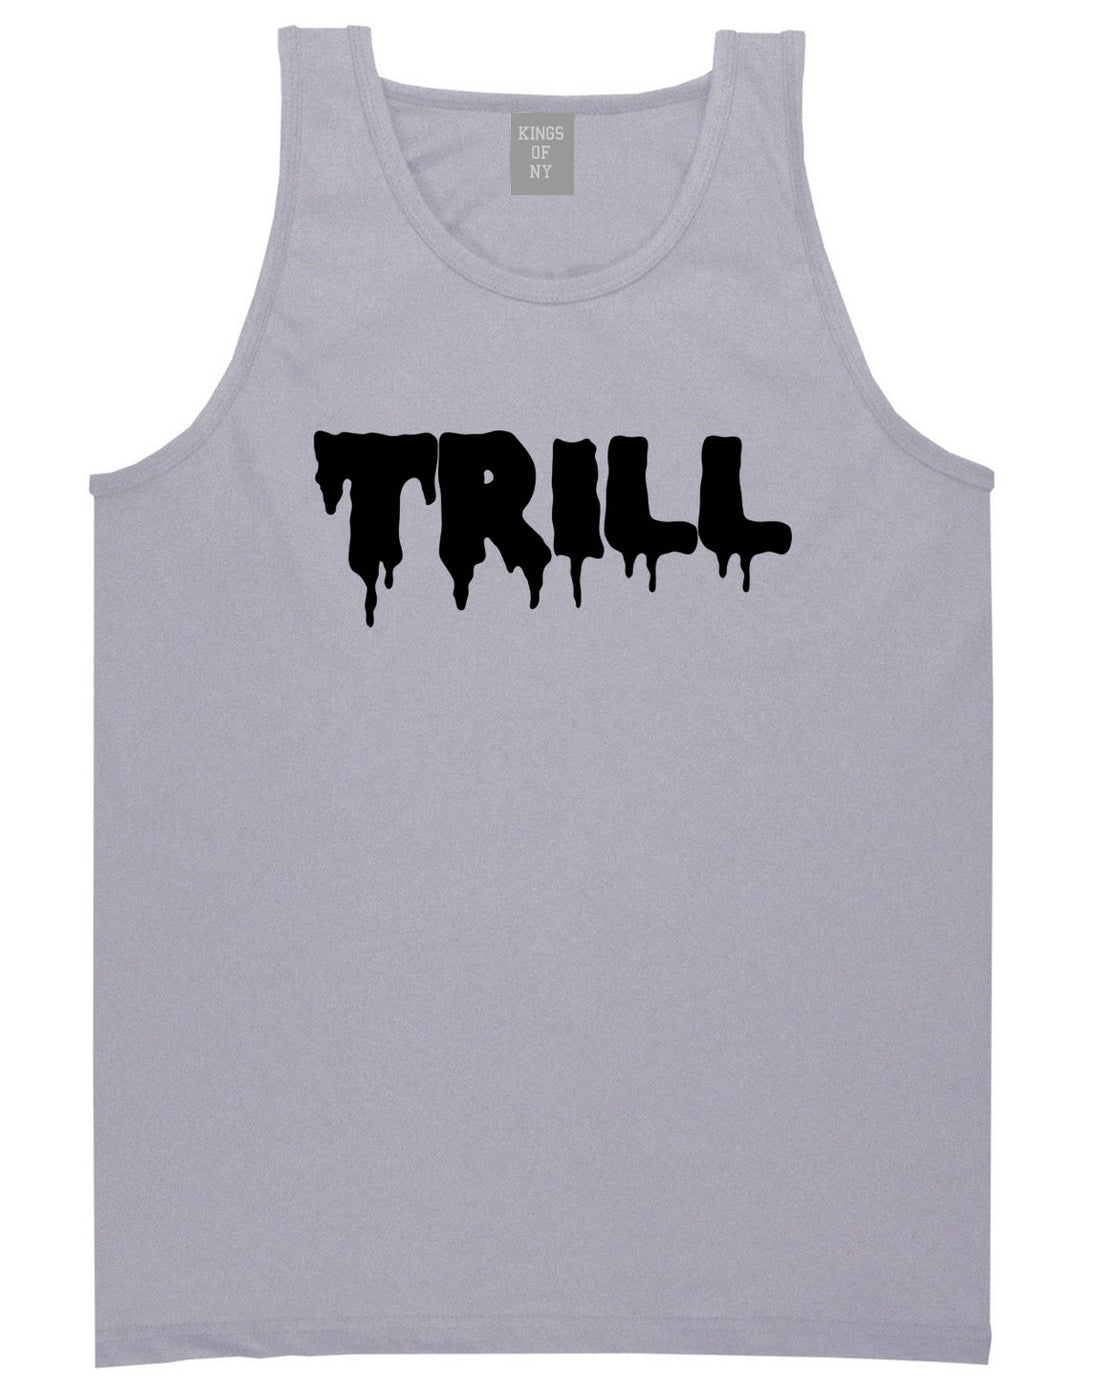 Trill Blood New York Bx Been Style Fashion Tank Top In Grey by Kings Of NY